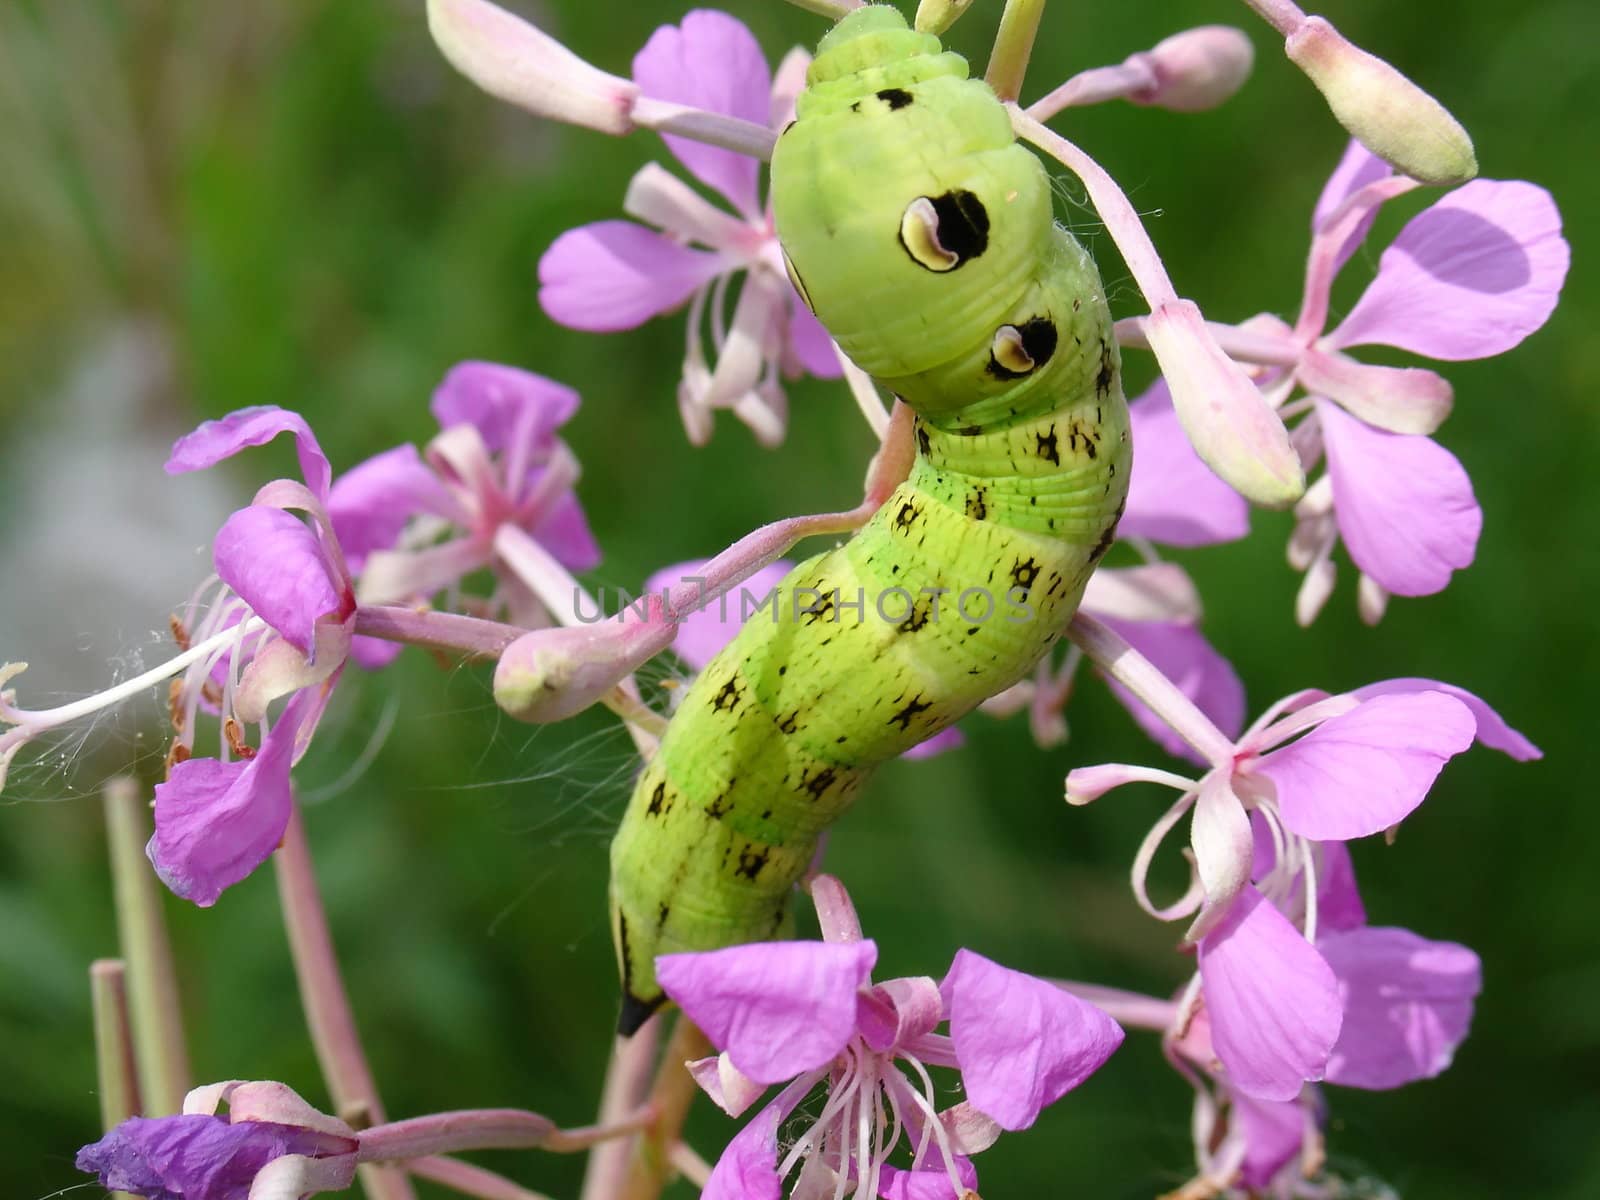 Green caterpillar on flowers by tomatto